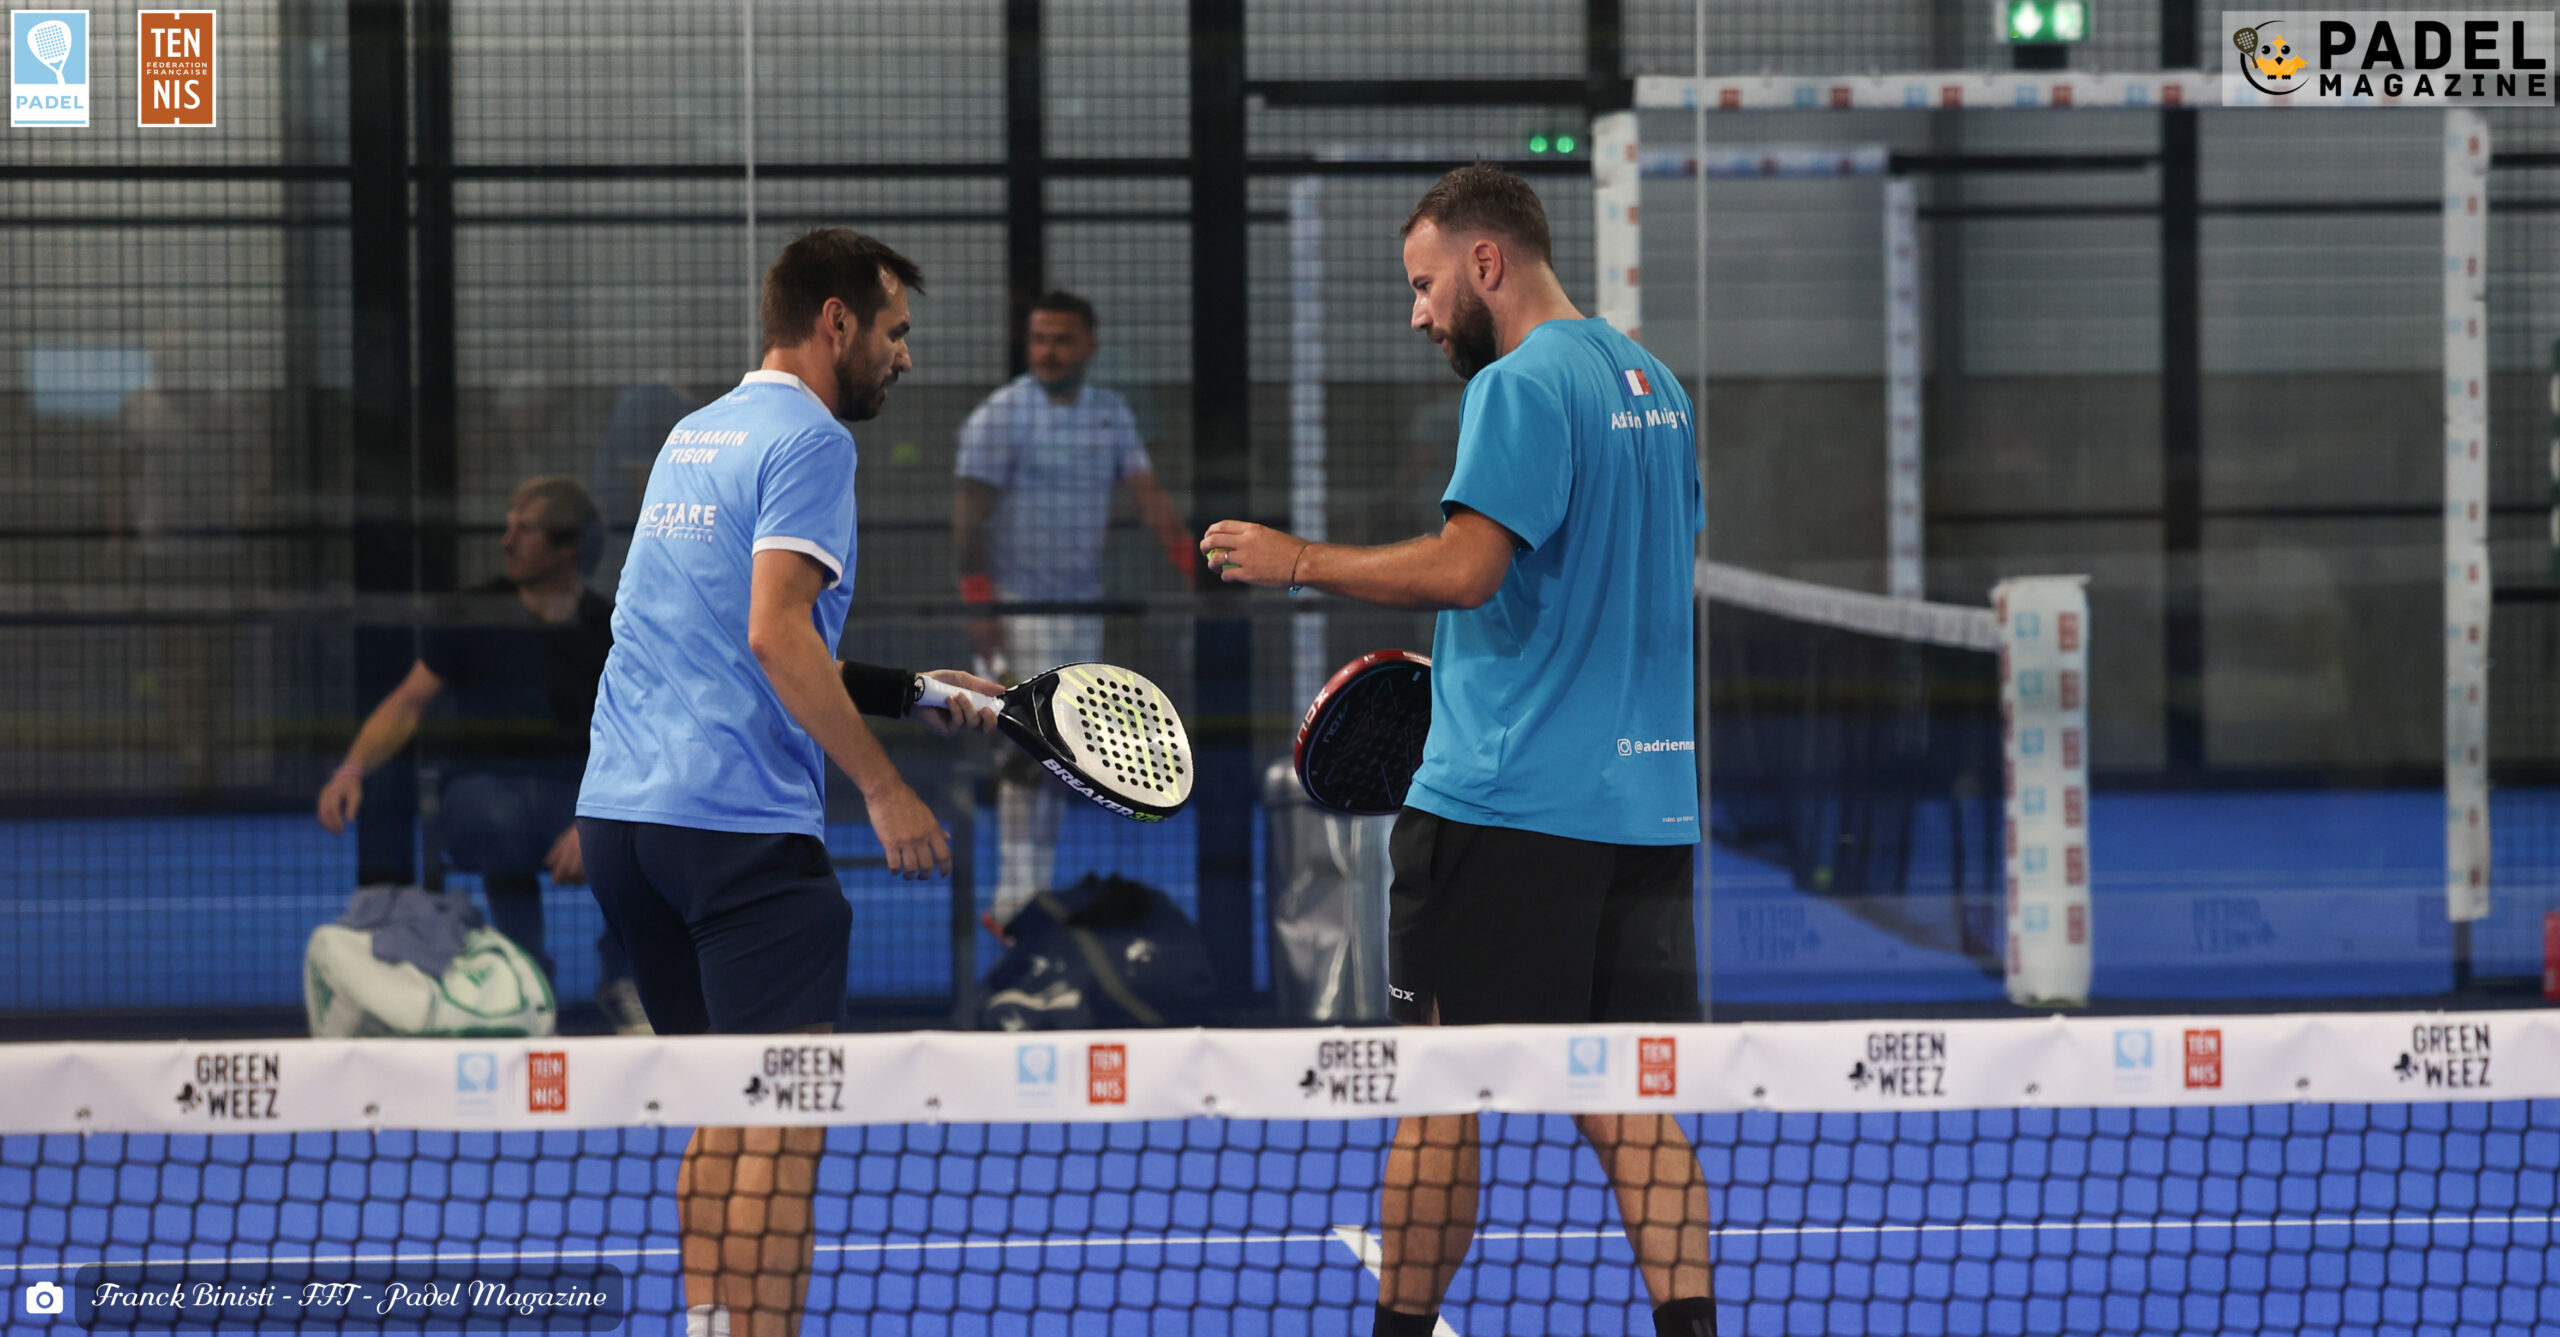 Tison / Maigret: “Looking forward to playing this semi-final against the favorites of France, Blanqué / Leygue”